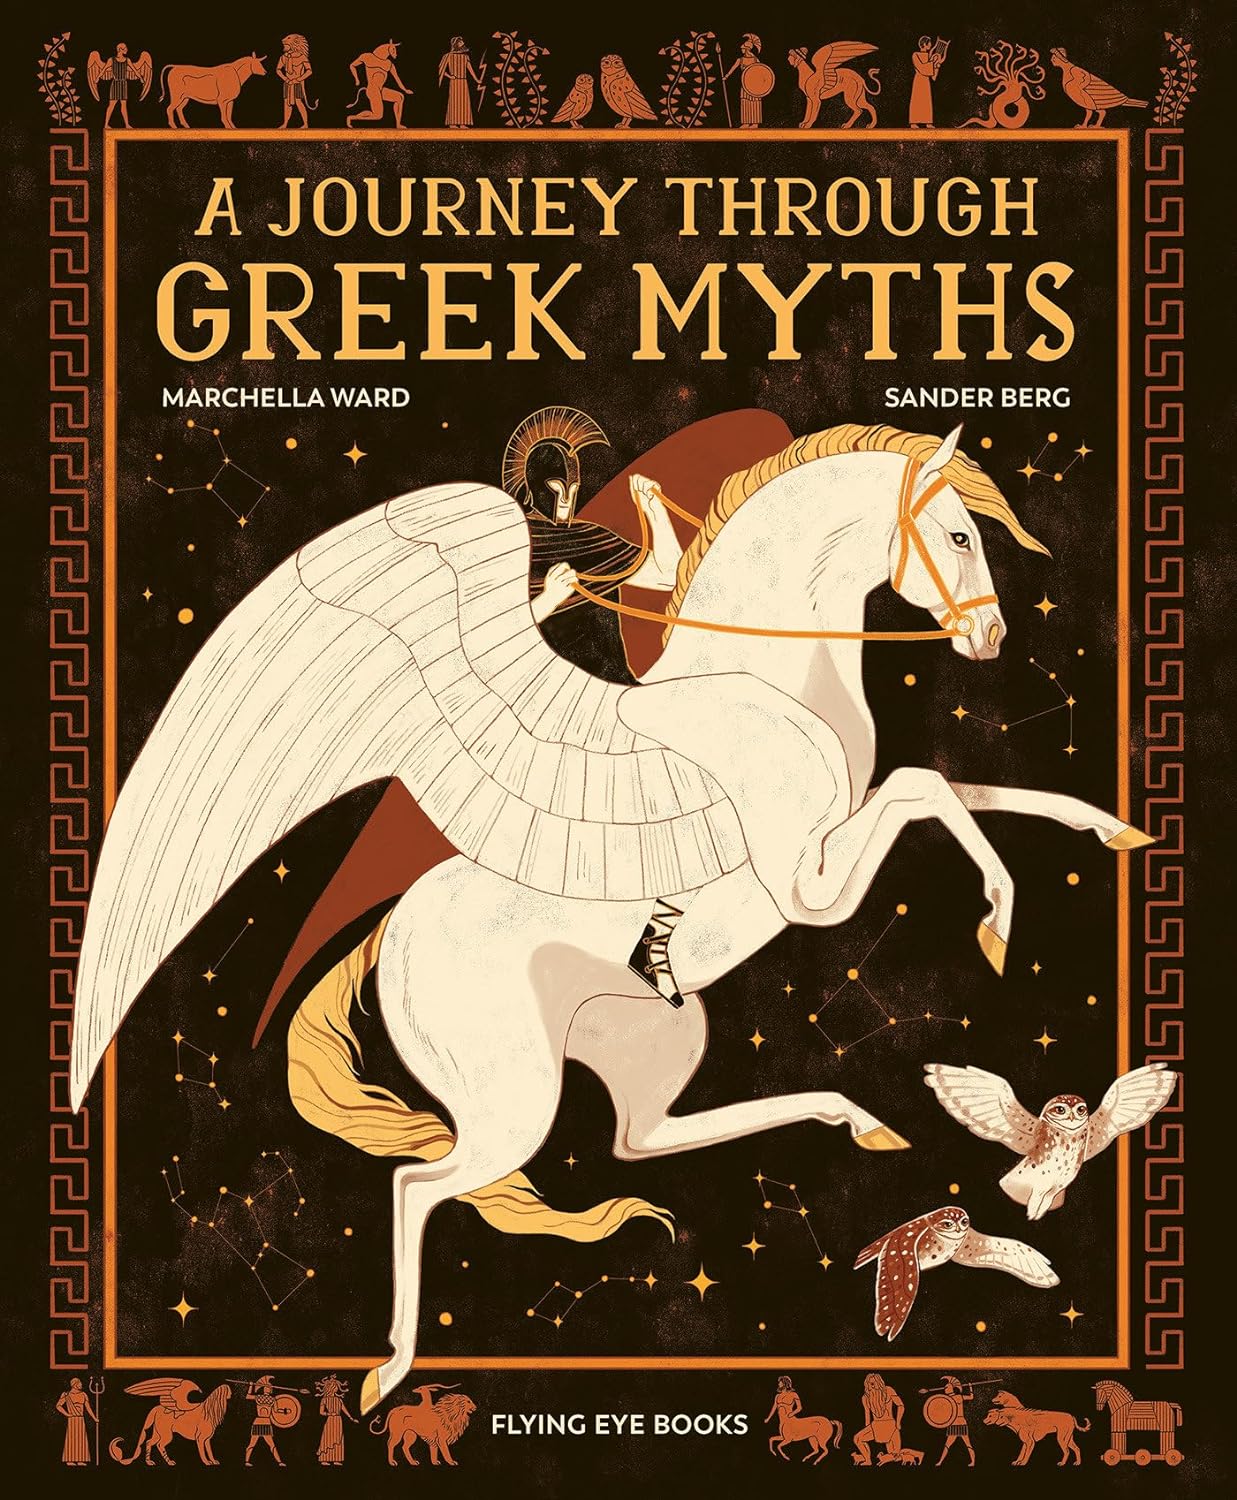 Image for "A Journey Through Greek Myths"